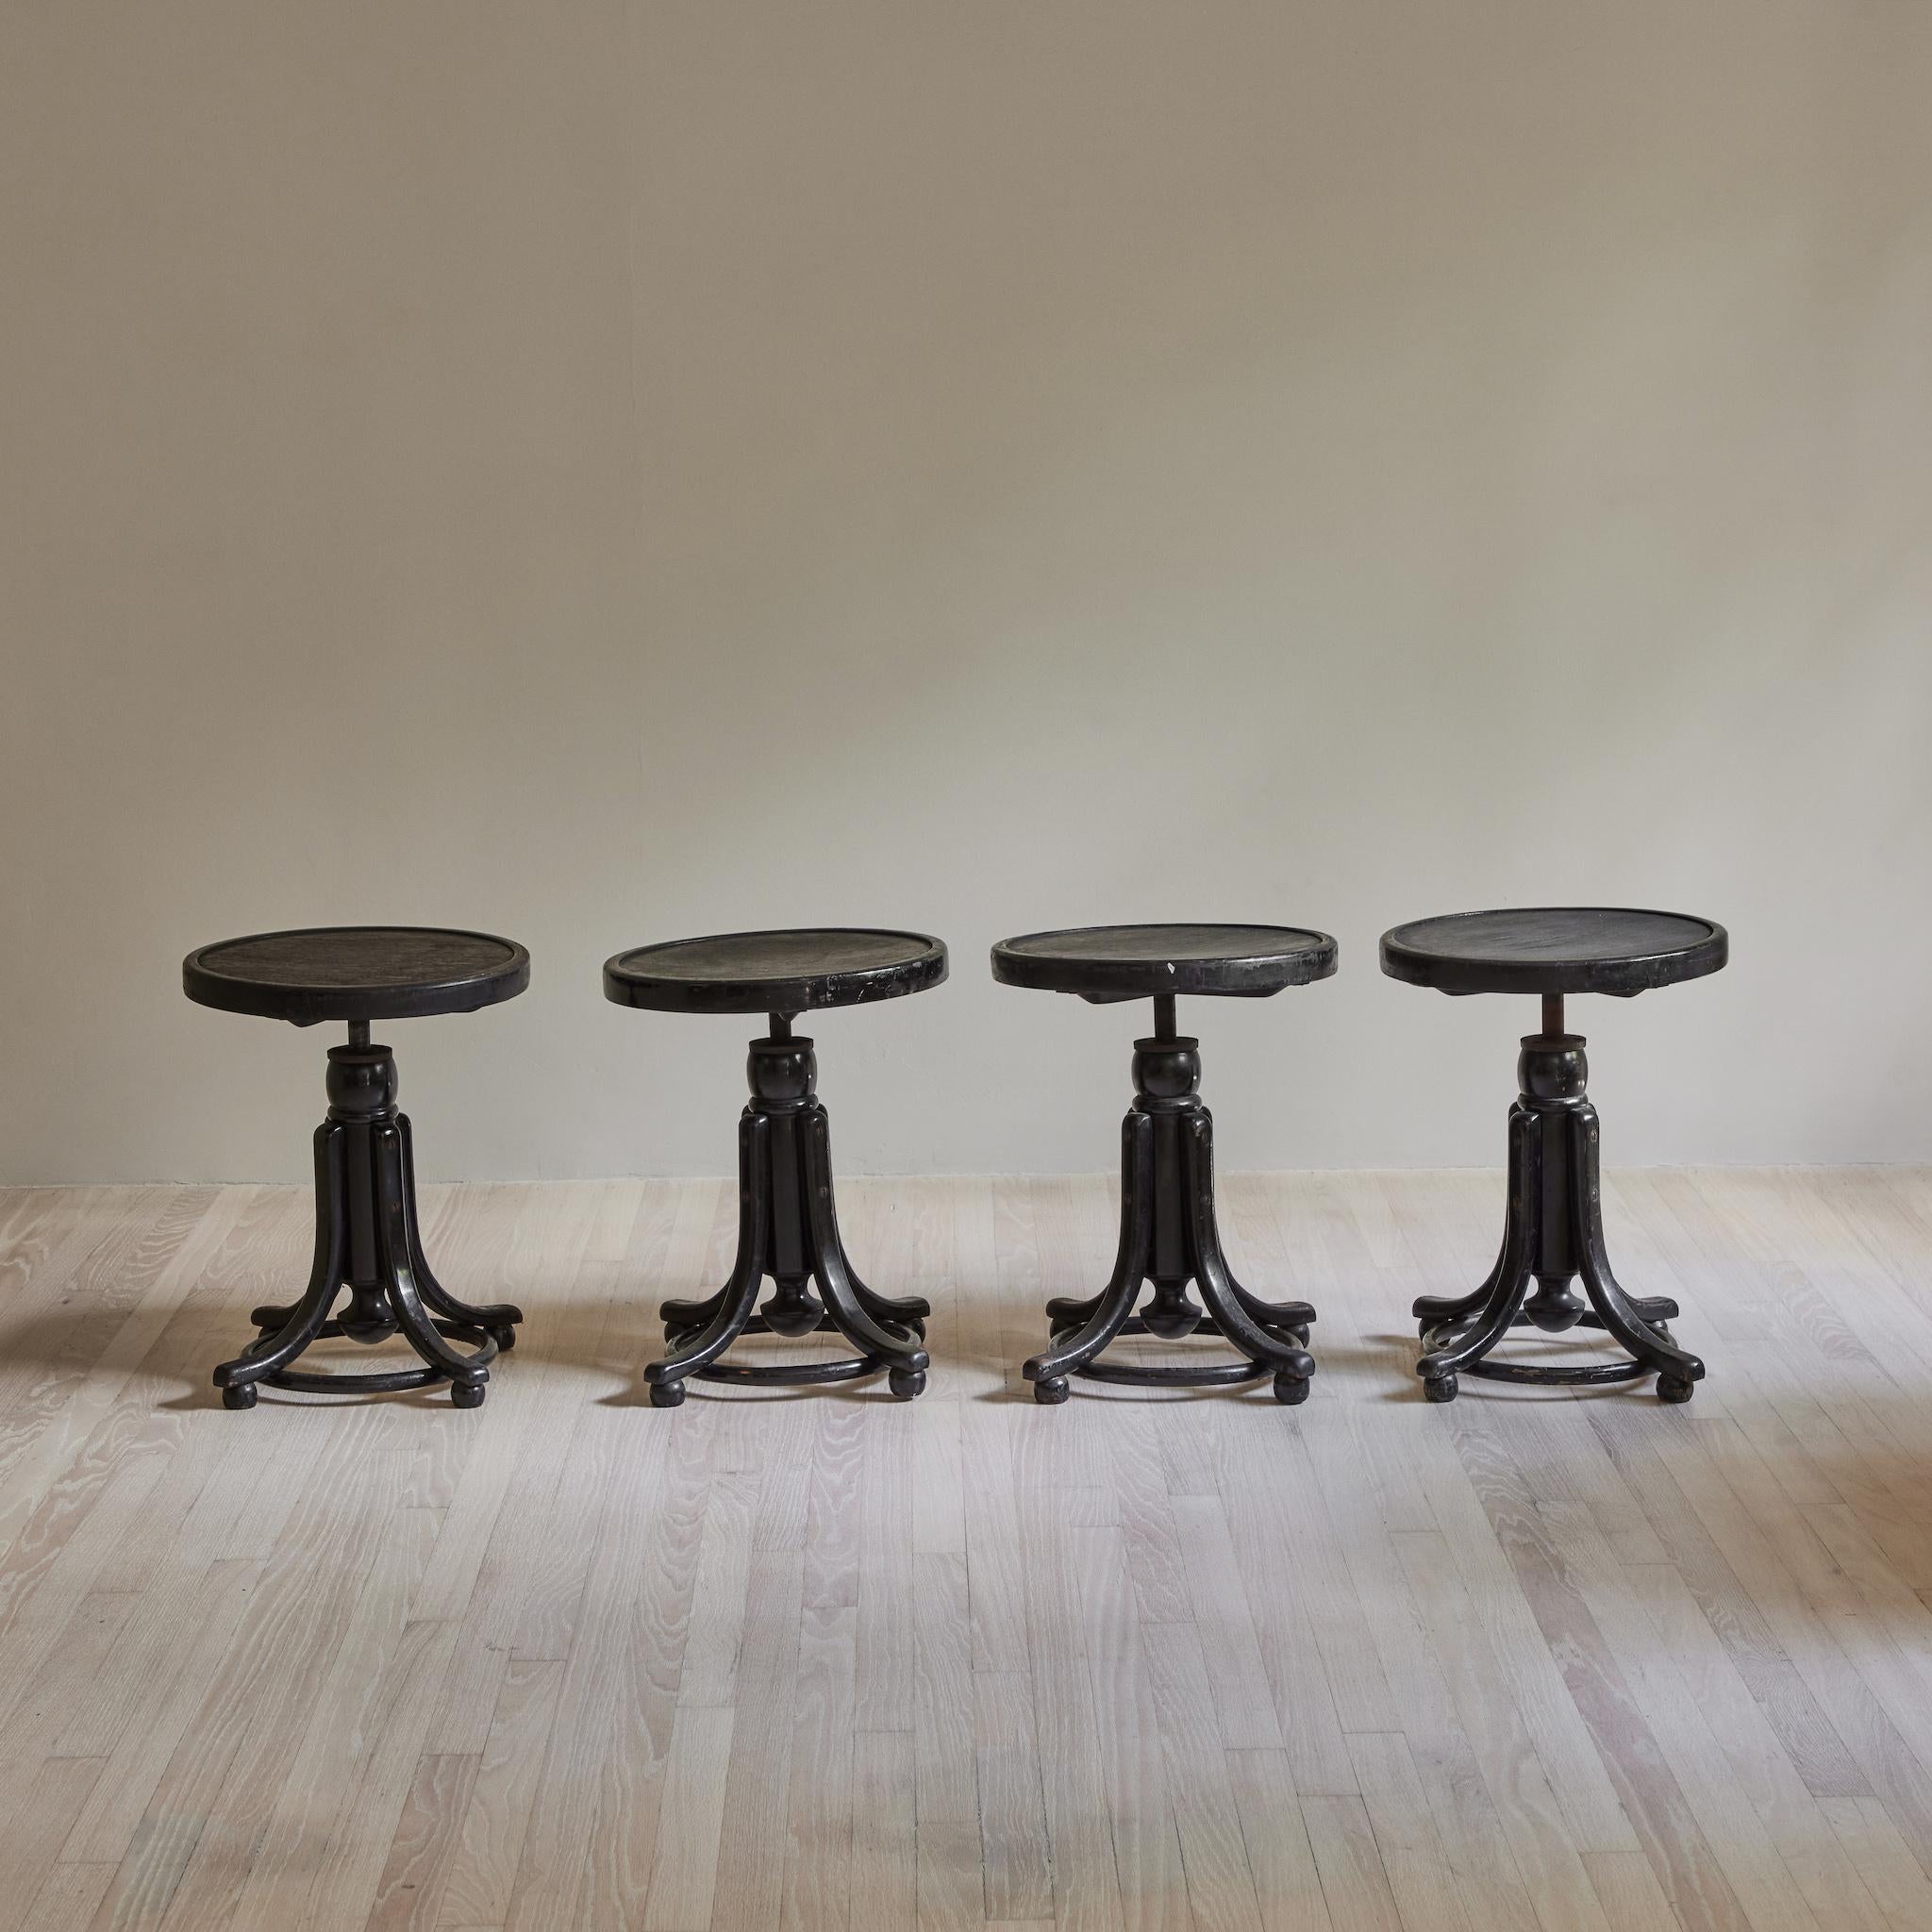 Two of four wooden adjustable stools by Thonet (an Austrian company) commissioned by a company in France. Seat adjusts from 17-21.5 inches. (Two sold)